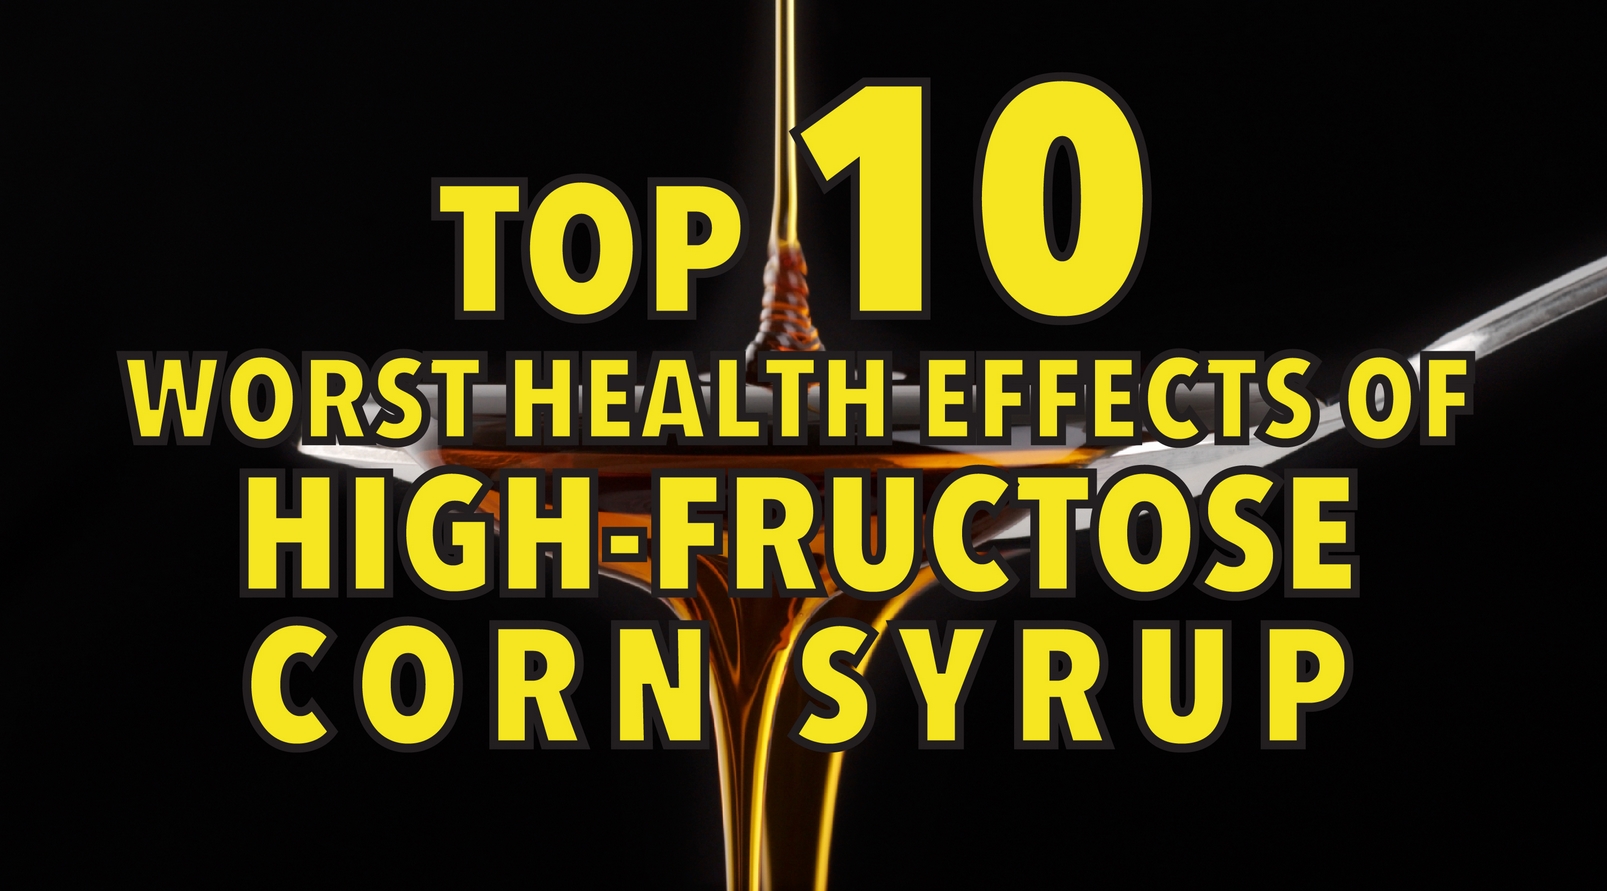 Top 10 worst health effects of high-fructose corn syrup-01